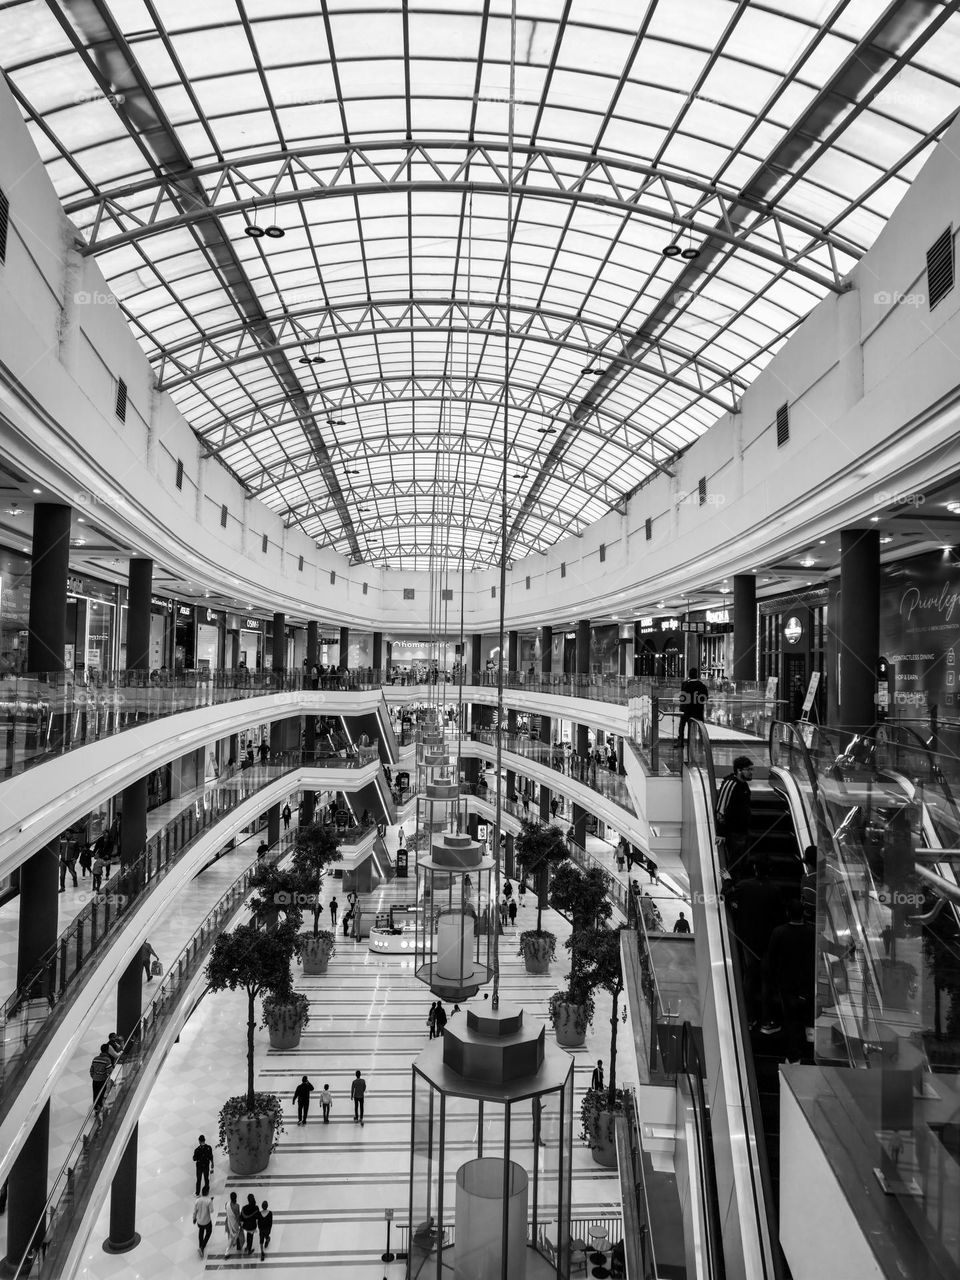 Architectural view of interior view of a mall